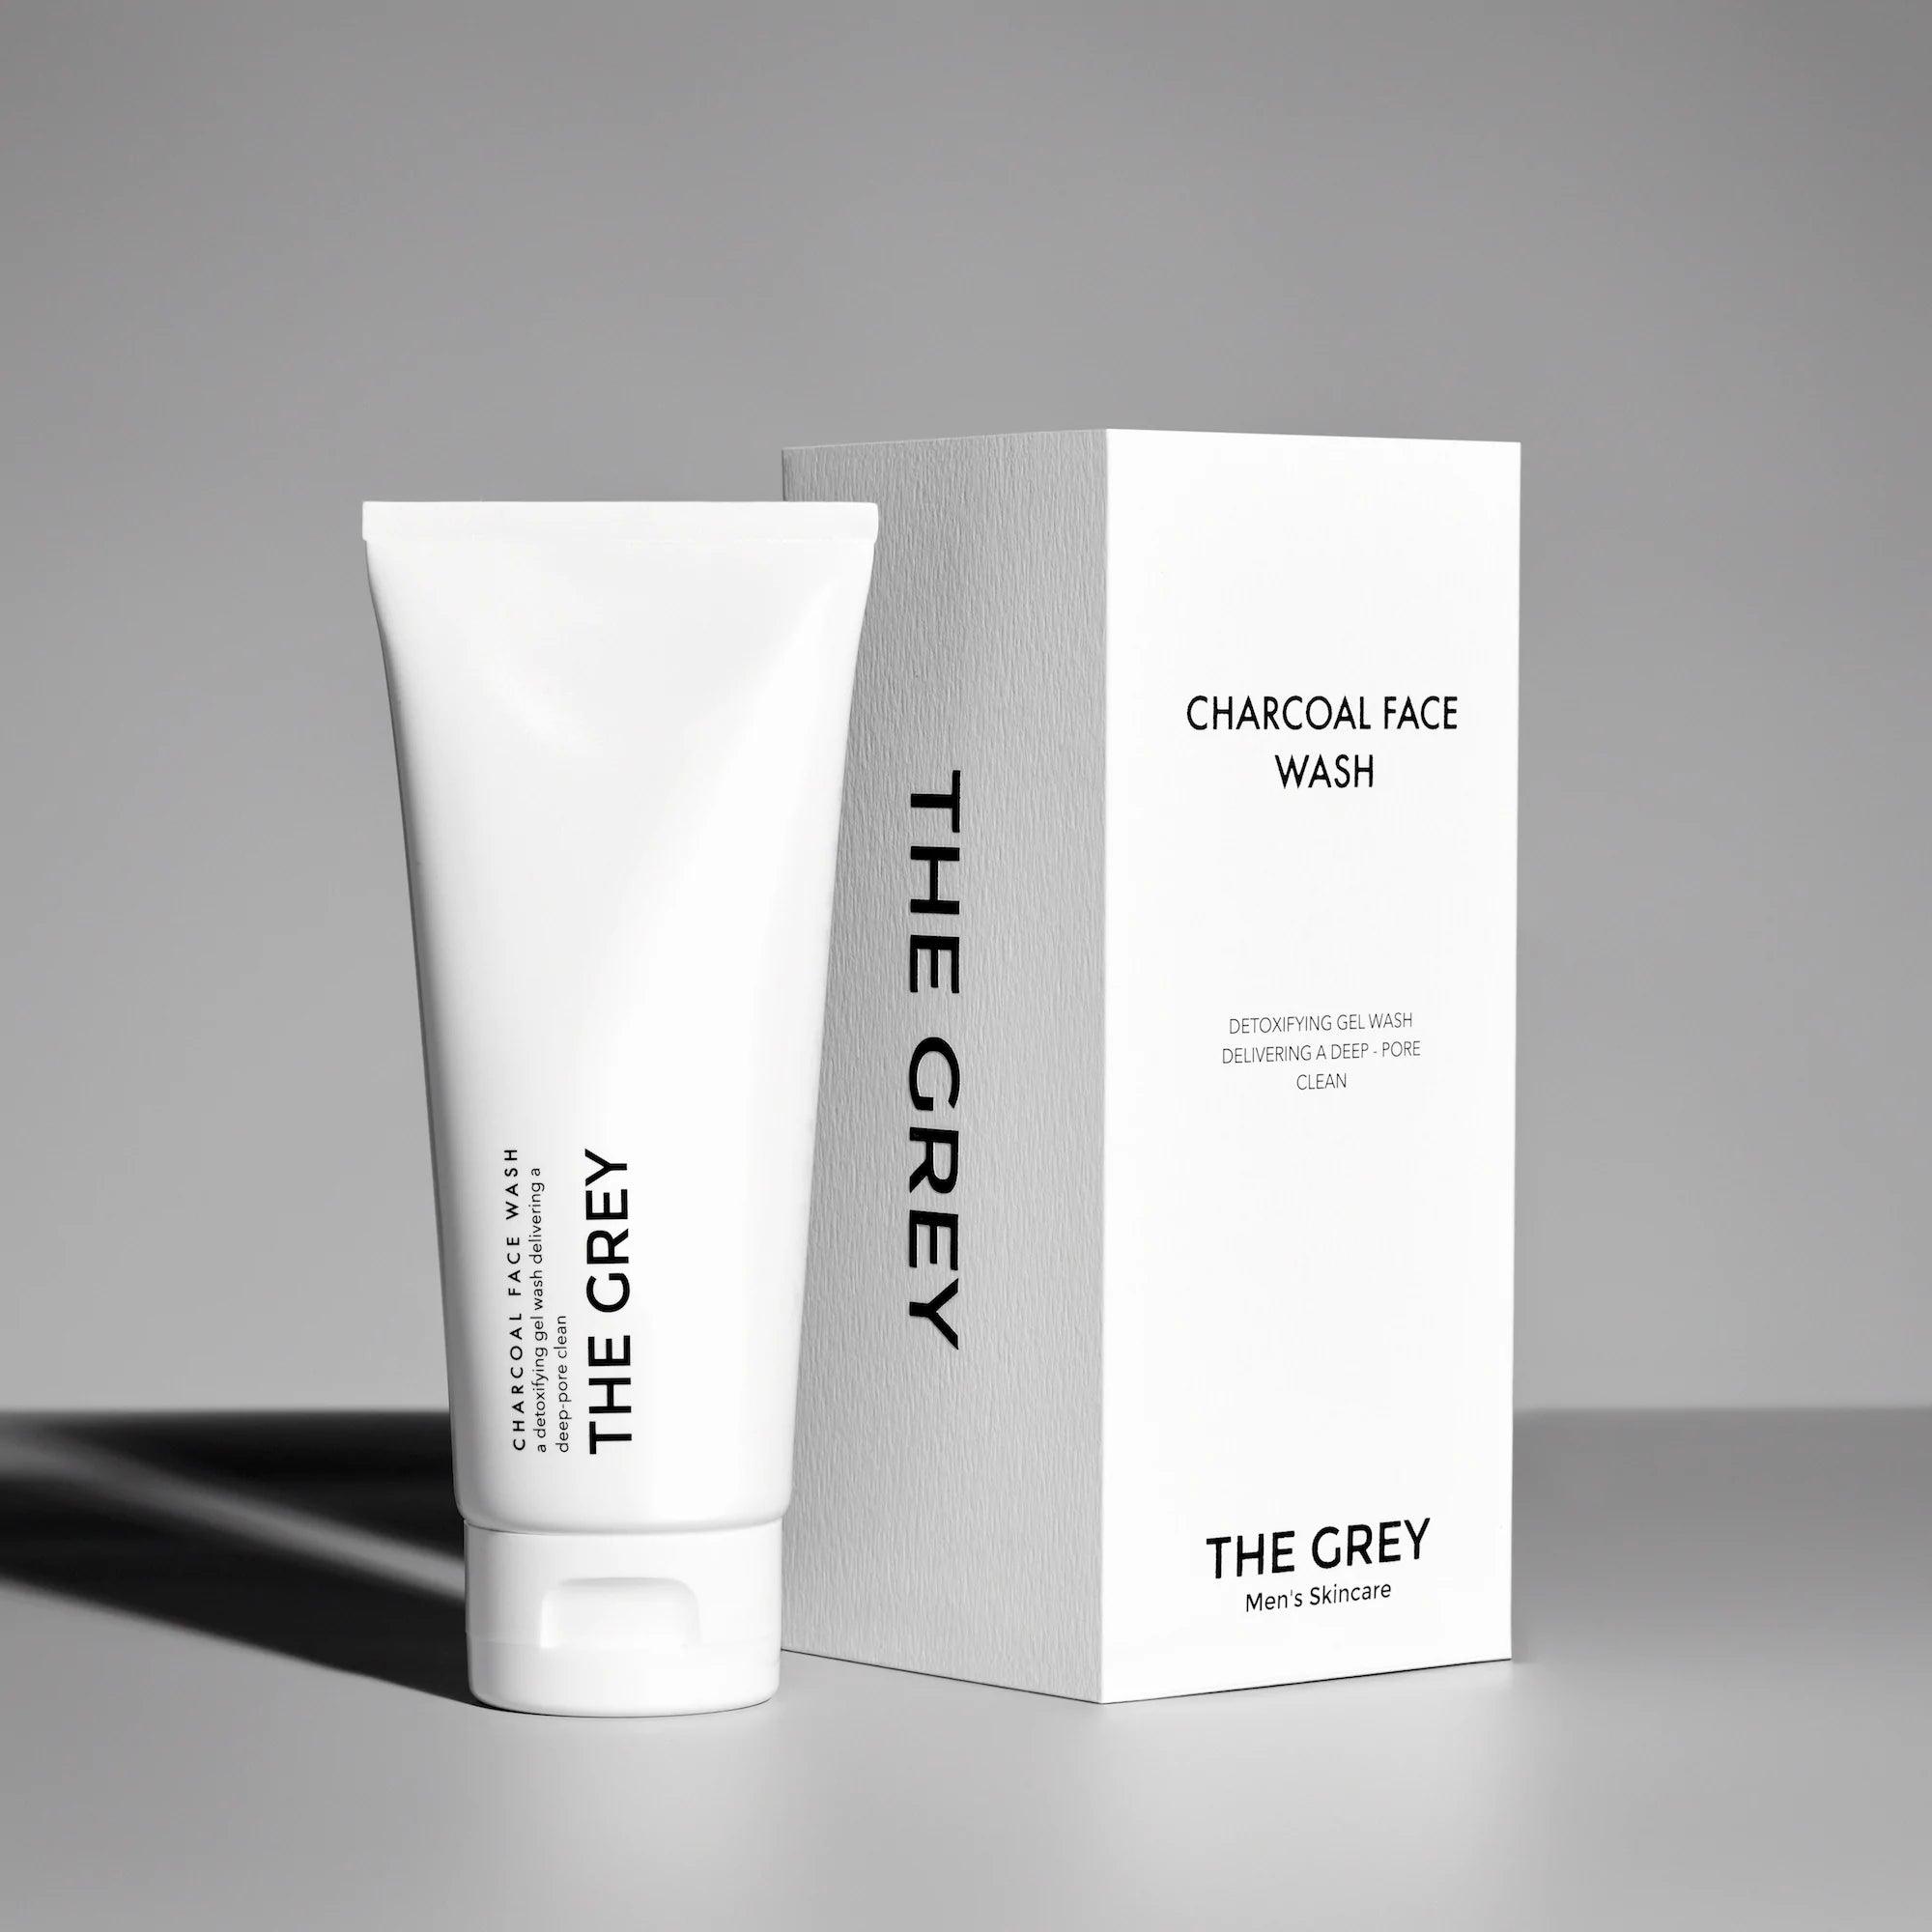 Charcoal Face Wash - The Grey Men's Skincare